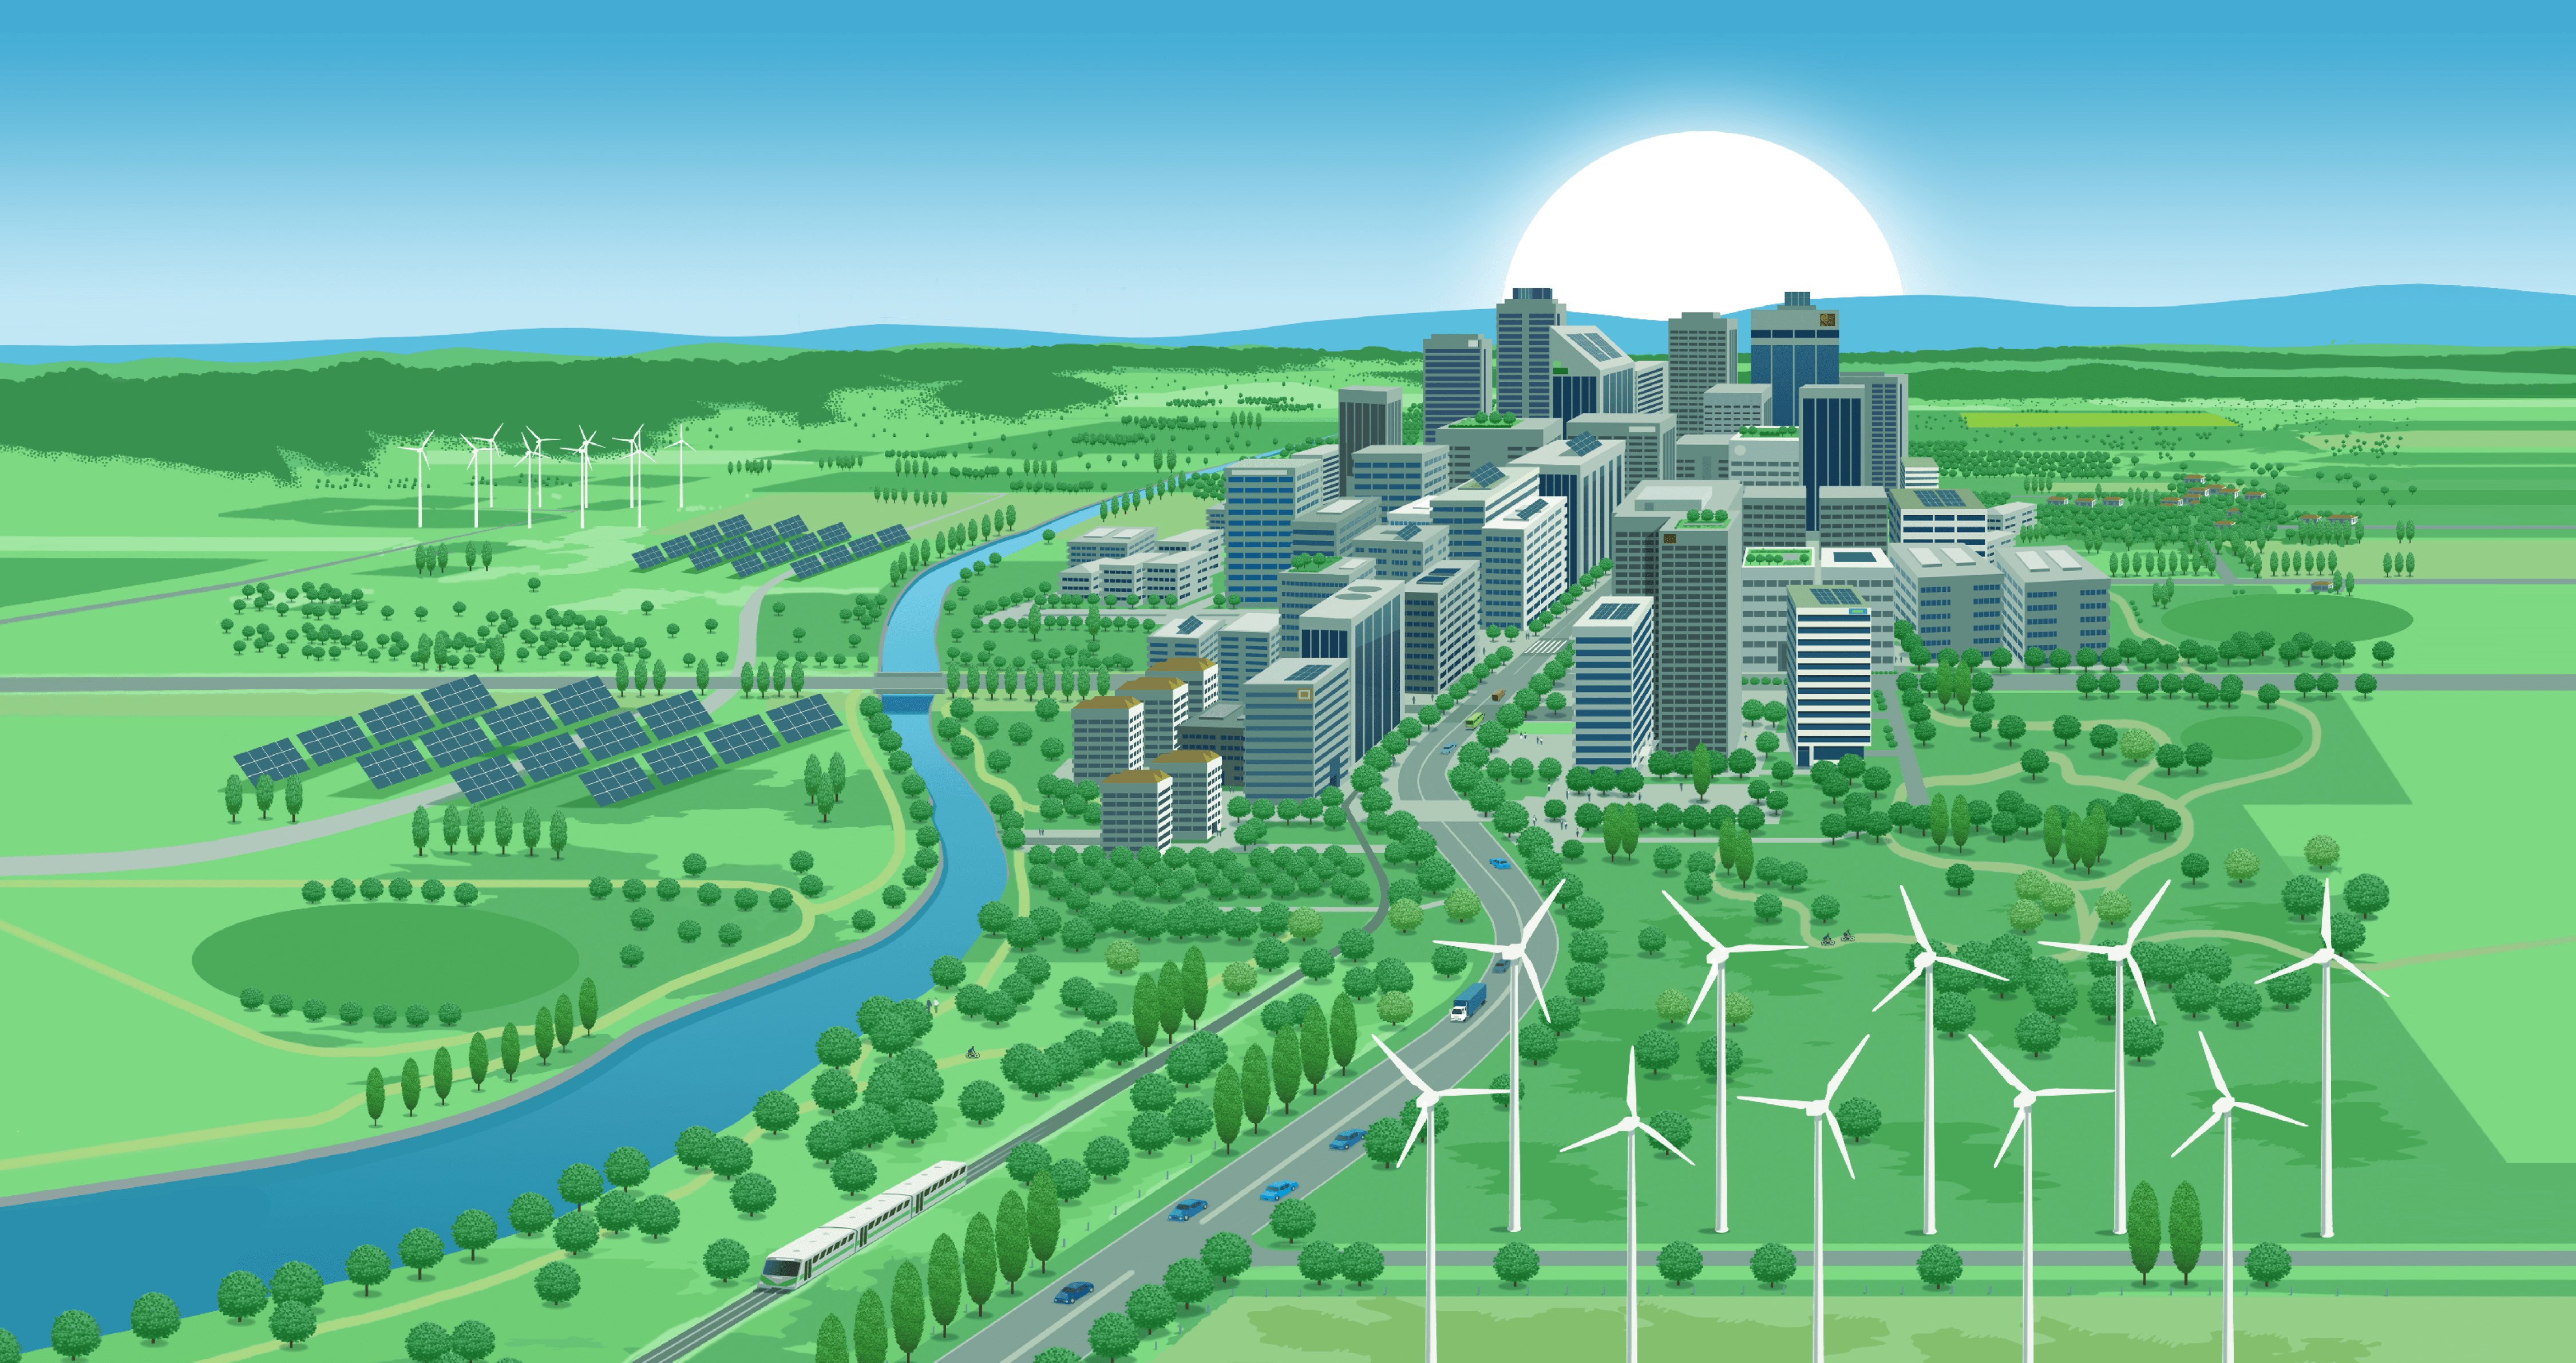 Rasterised illustration of a city panorama and environs. Featuring wind turbines, solar power panels, clean water and environment friendly roadways.